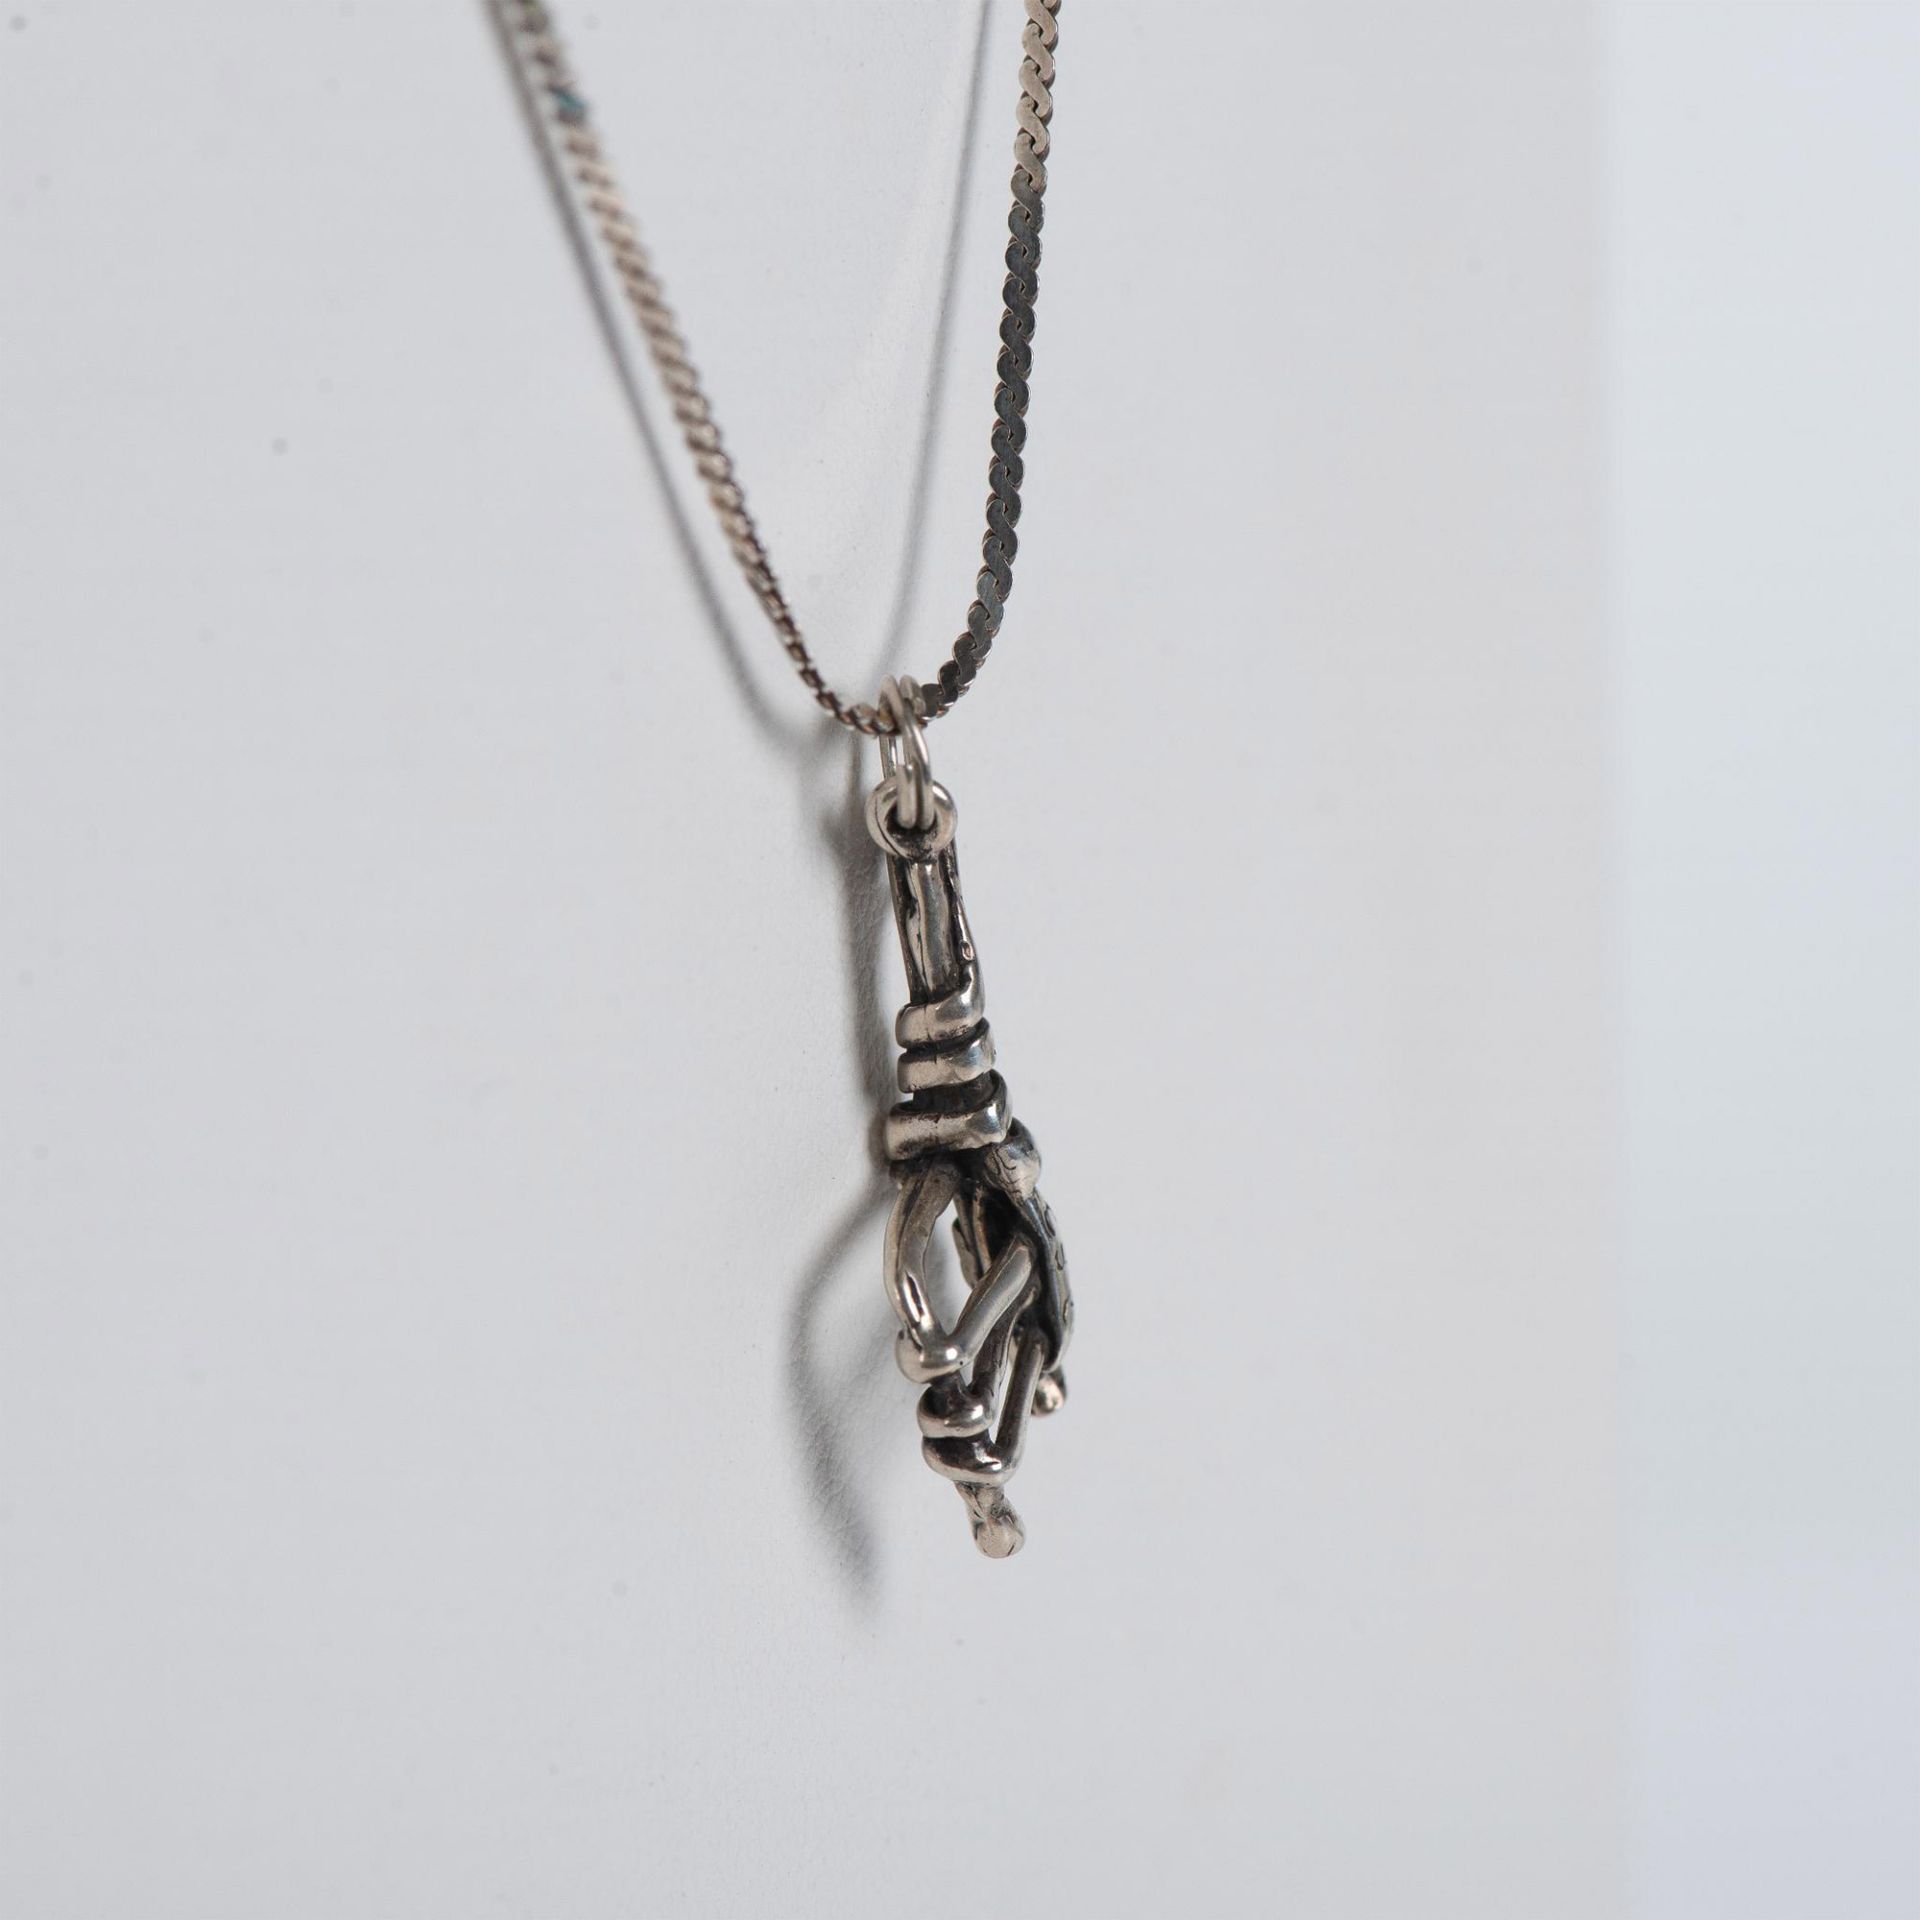 Silver Native American Stick Figure Horse Necklace - Image 4 of 7